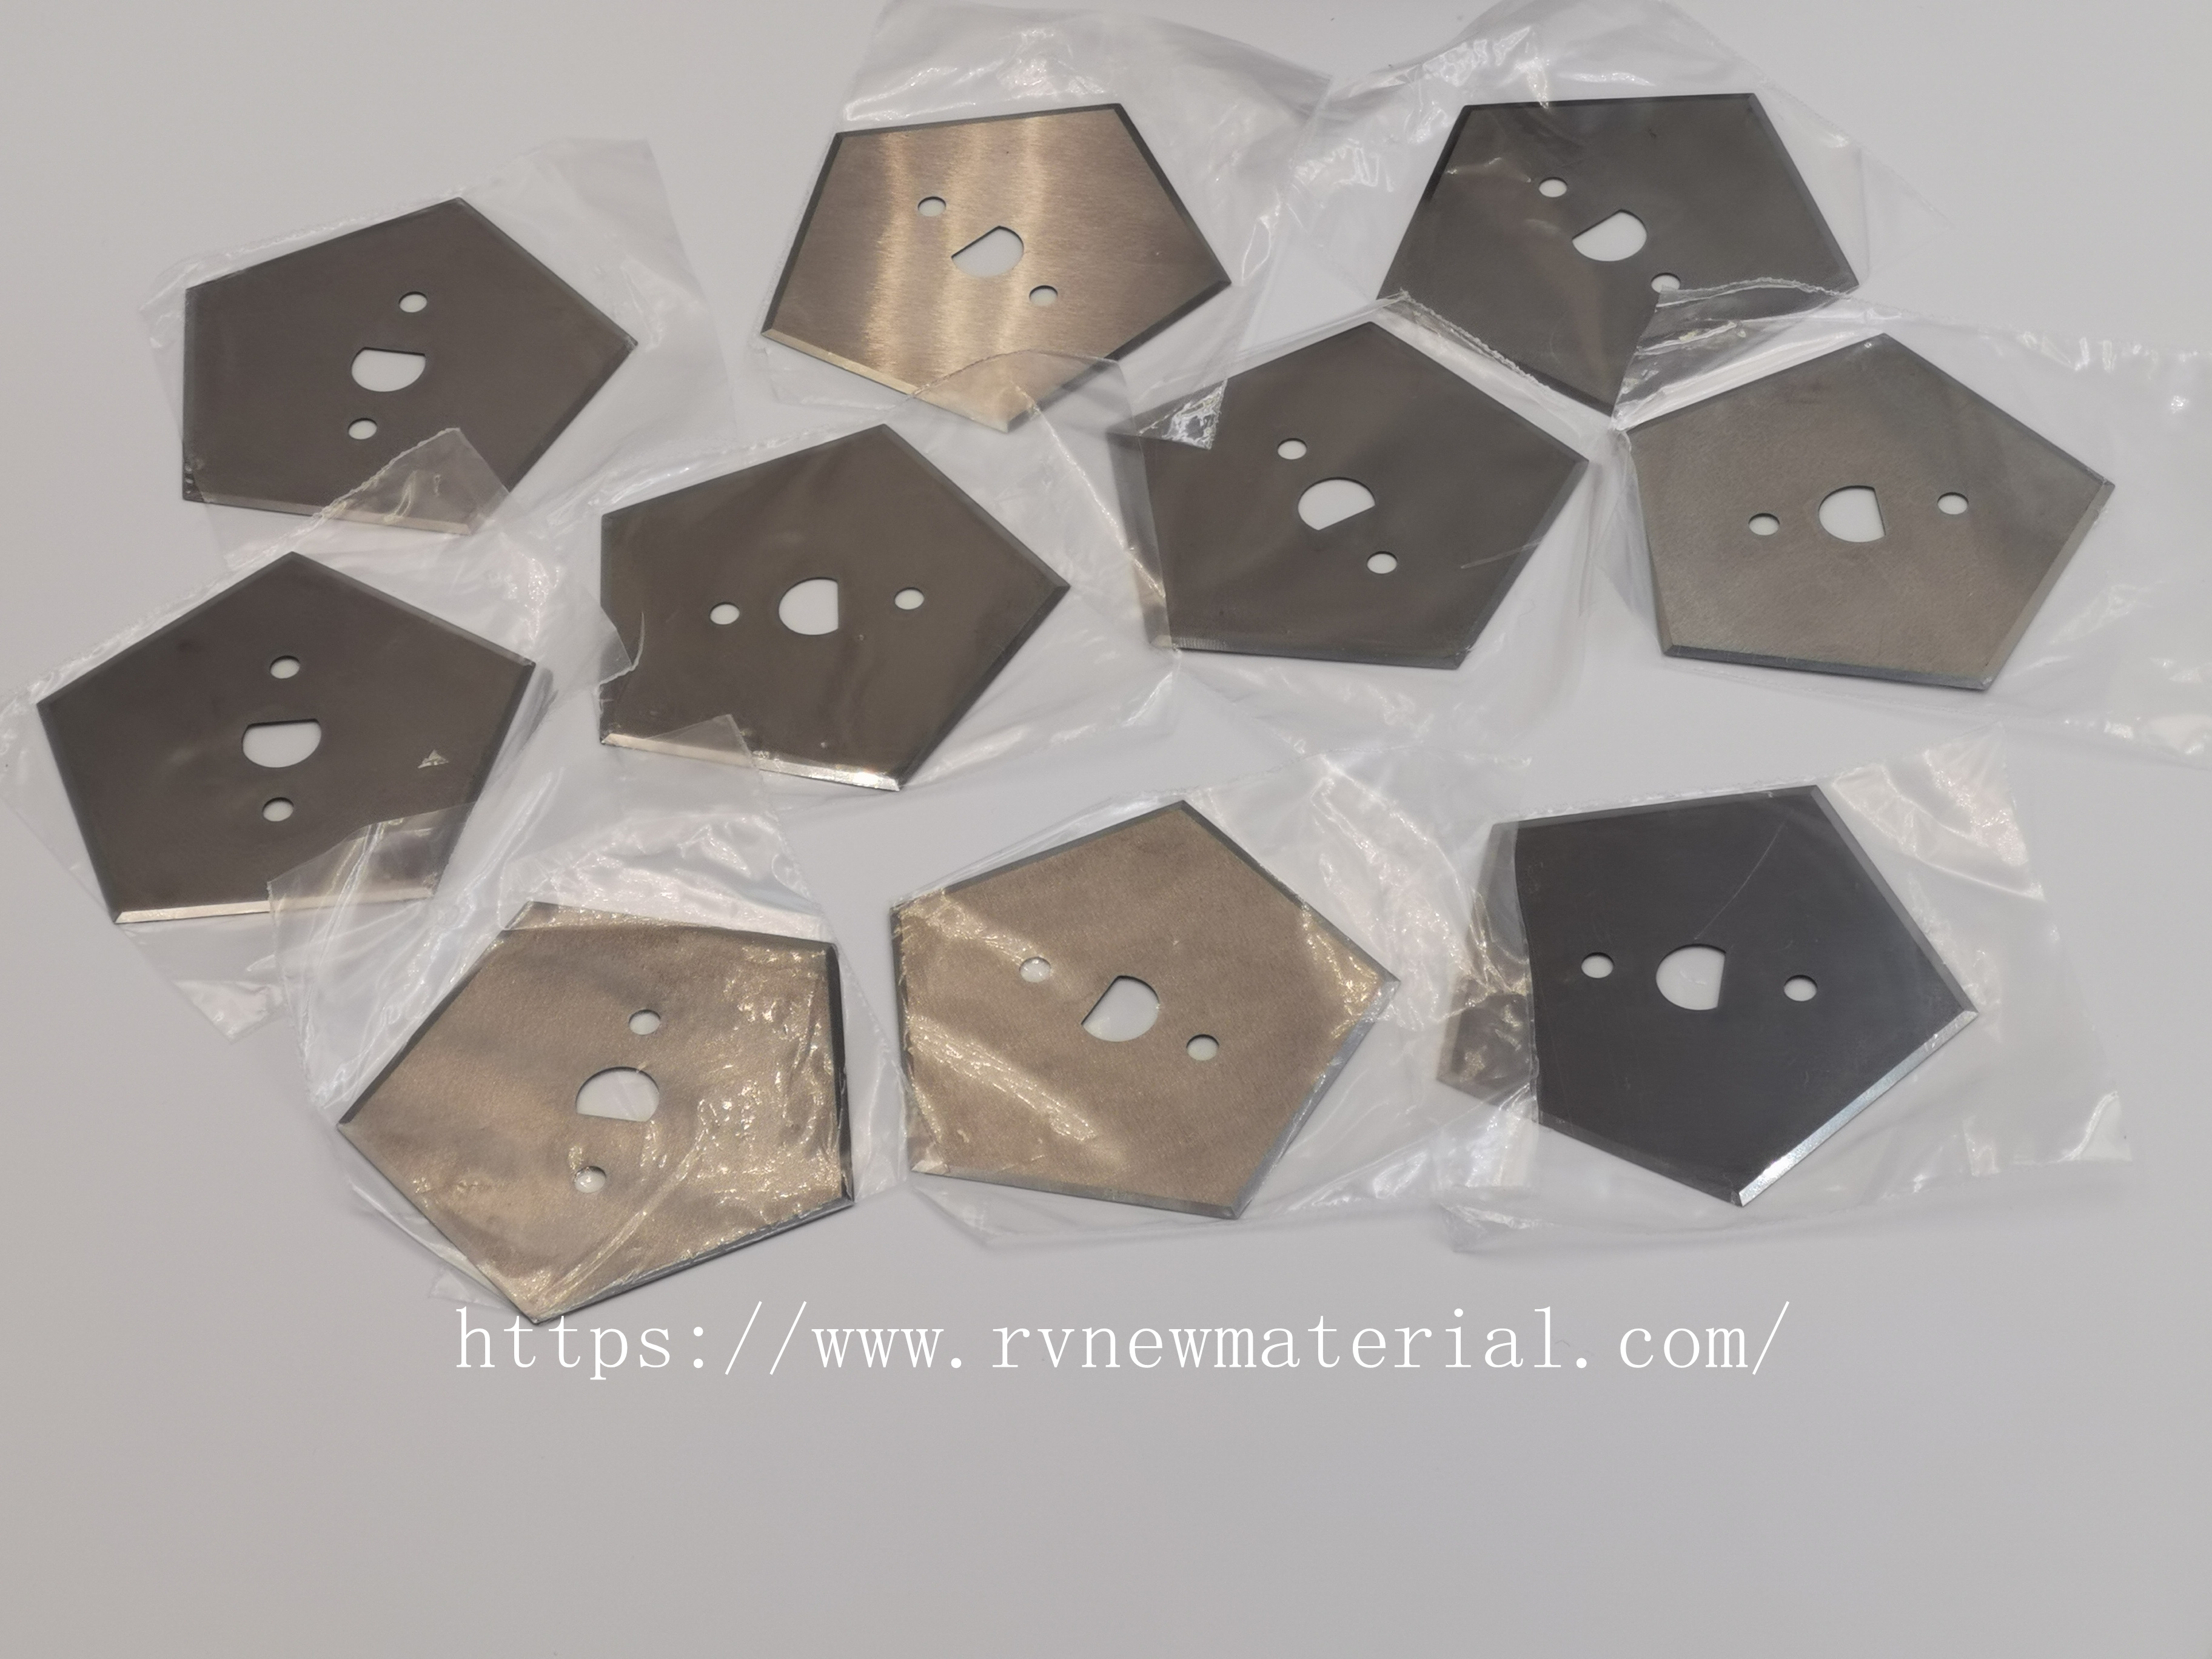 Polished Carbide Indexable Insert Knives for Wood Working